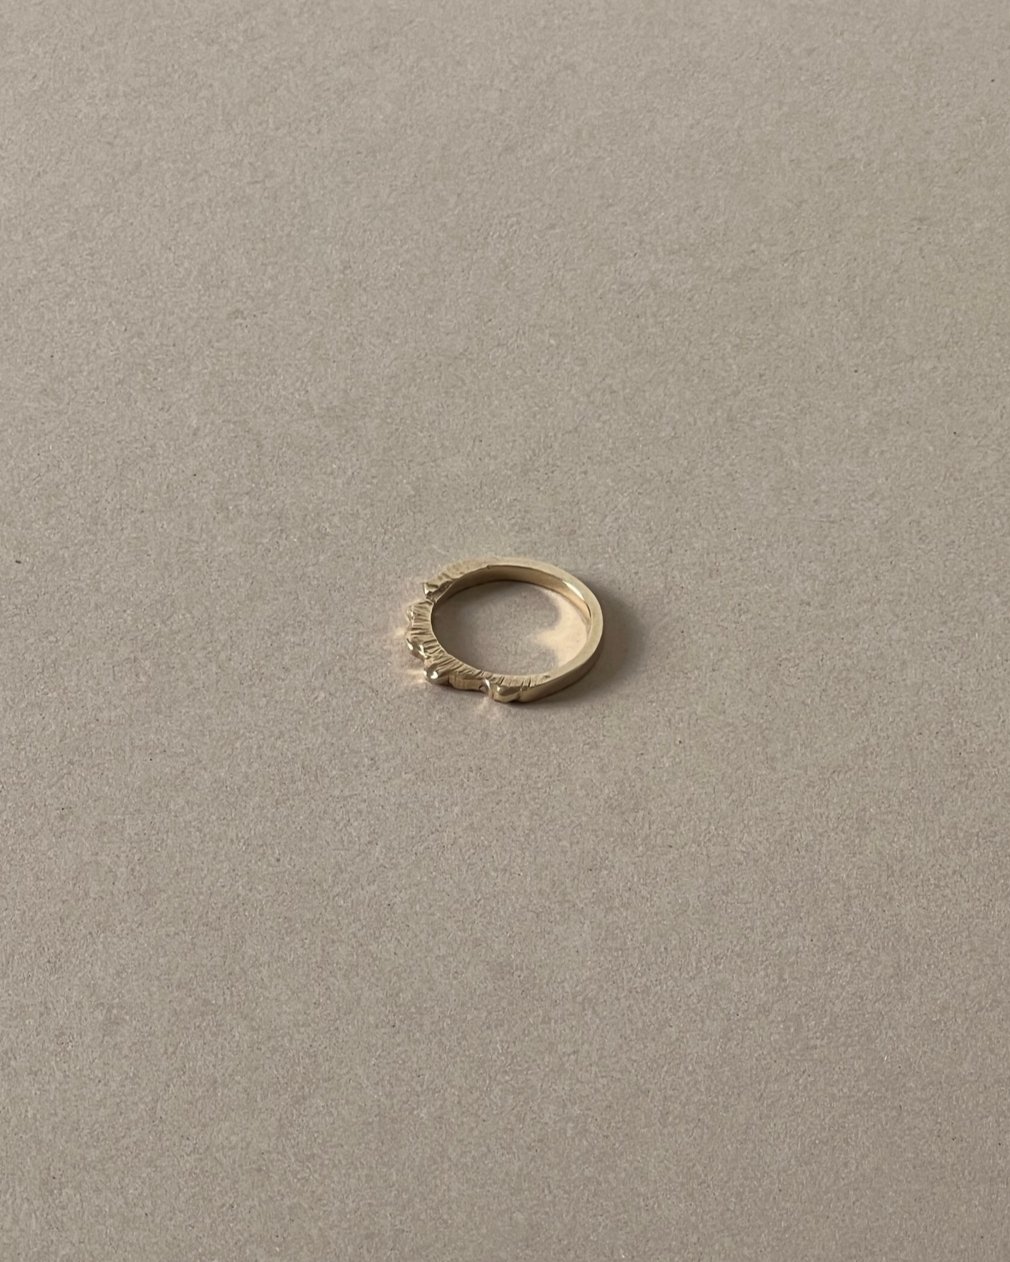 The Alp Ring, one of Keyna's first creations ⛰

-
-
-
-
-
#keyna #keynajewellery #sustainablejewellery #recycledmetal #ethicaljewellery #sustainability #sustainable #sustainablefashion #slowfashion #solidgold #sterlingsilver #nature